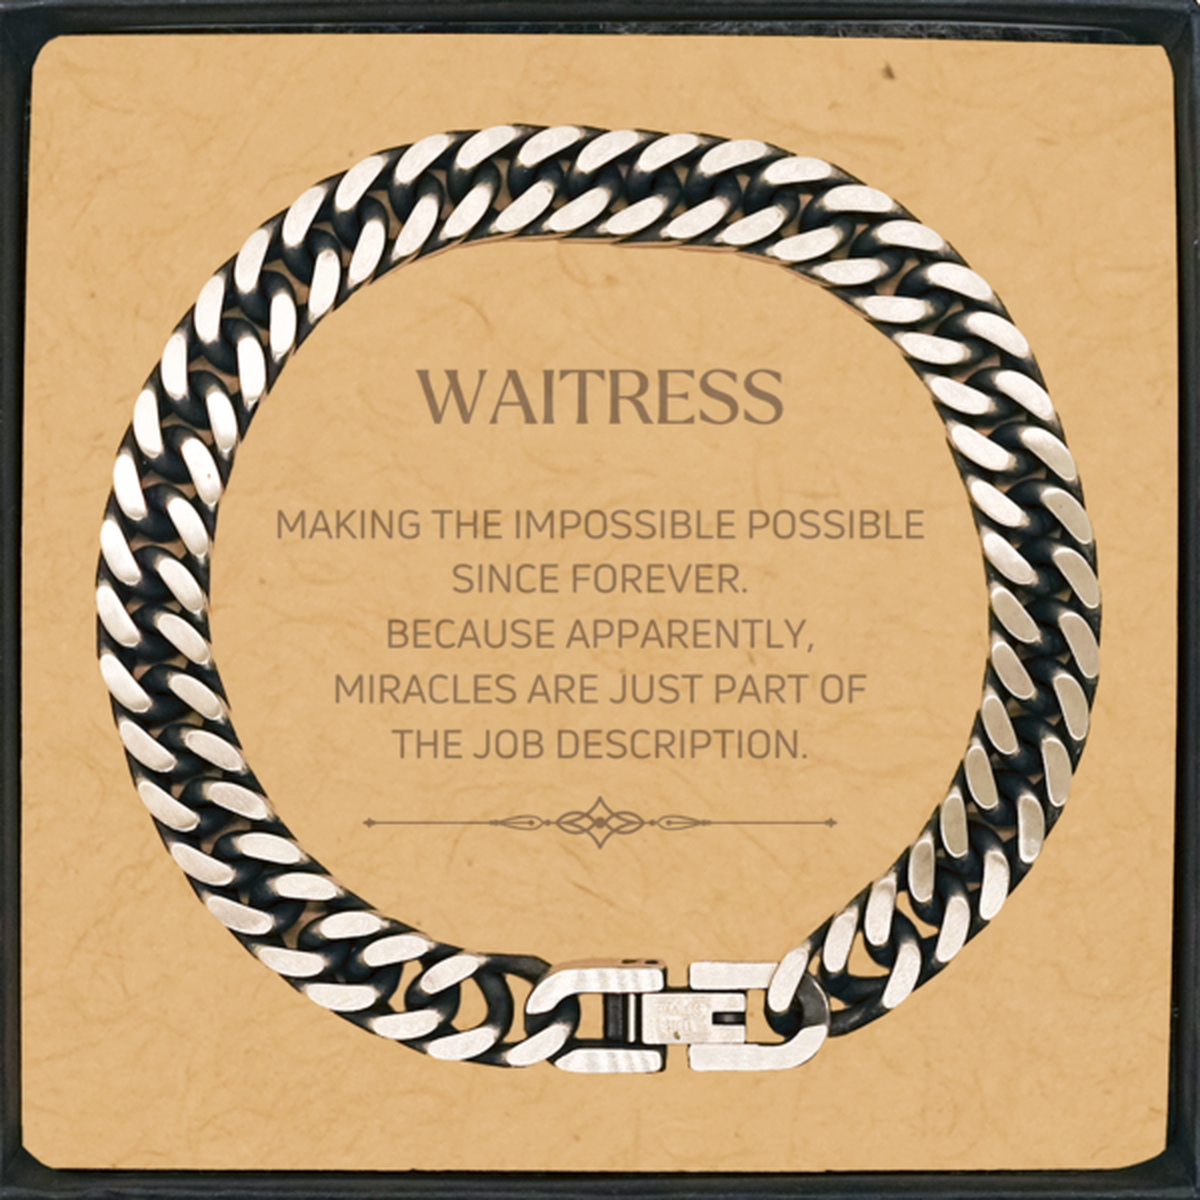 Funny Waitress Gifts, Miracles are just part of the job description, Inspirational Birthday Cuban Link Chain Bracelet For Waitress, Men, Women, Coworkers, Friends, Boss